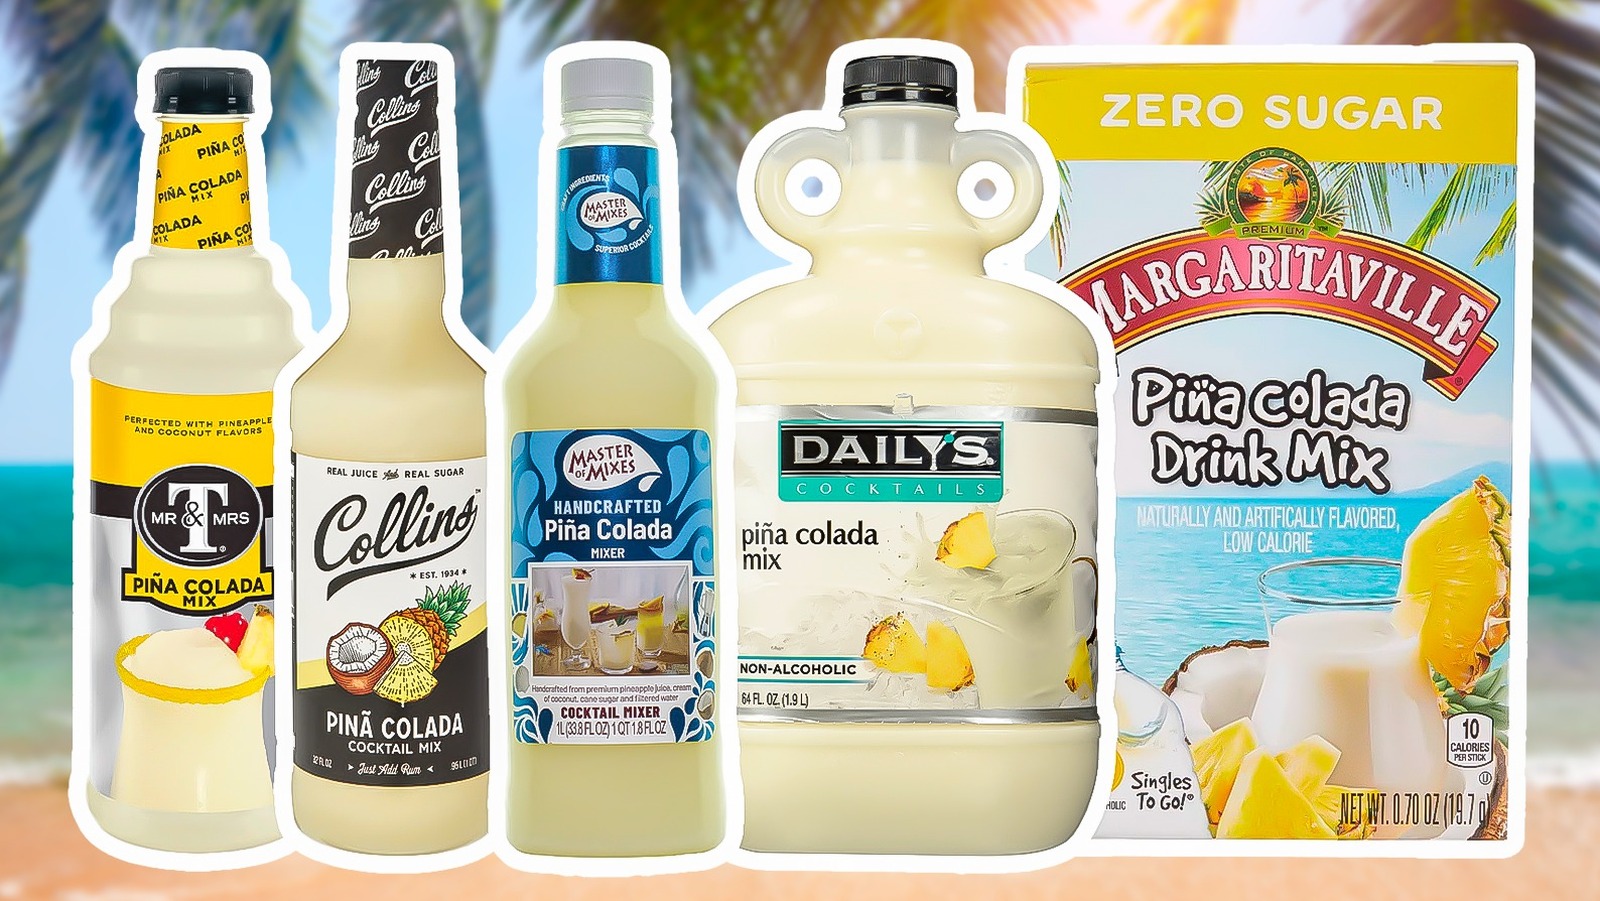 https://www.thedailymeal.com/img/gallery/14-store-bought-pia-colada-mixes-ranked/l-intro-1686684904.jpg